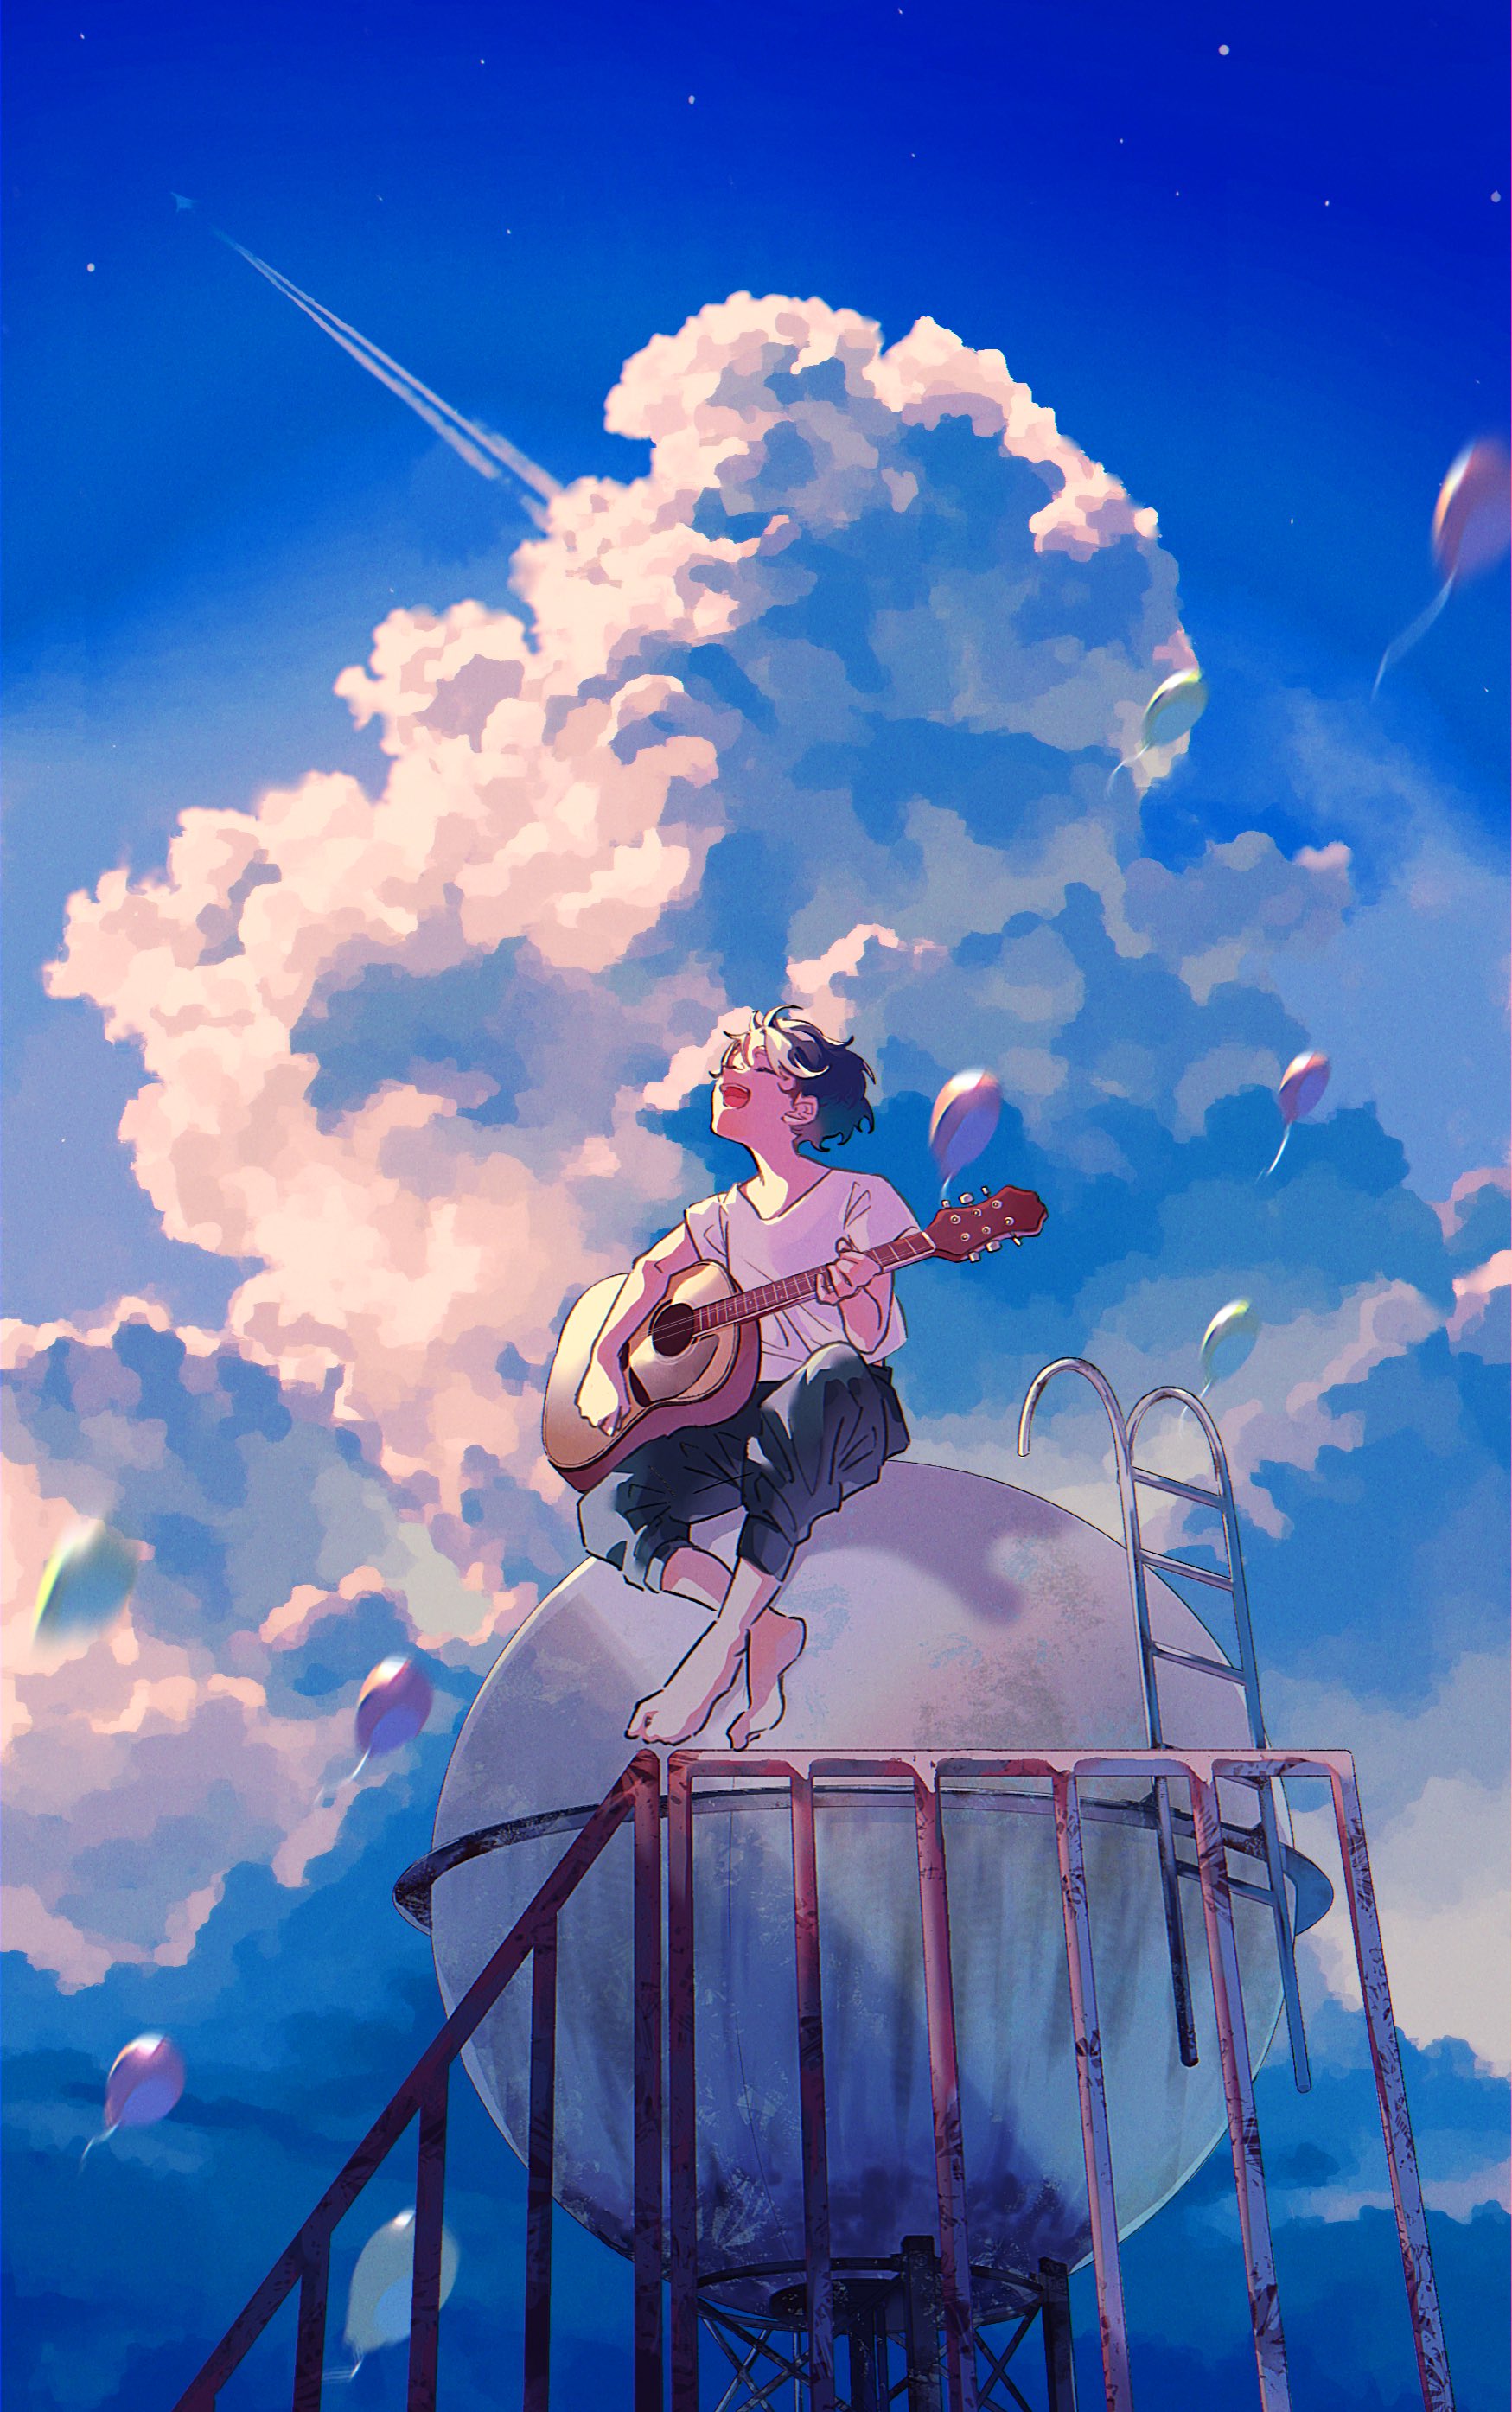 Mobile wallpaper Music Anime Guitar 1359114 download the picture for  free